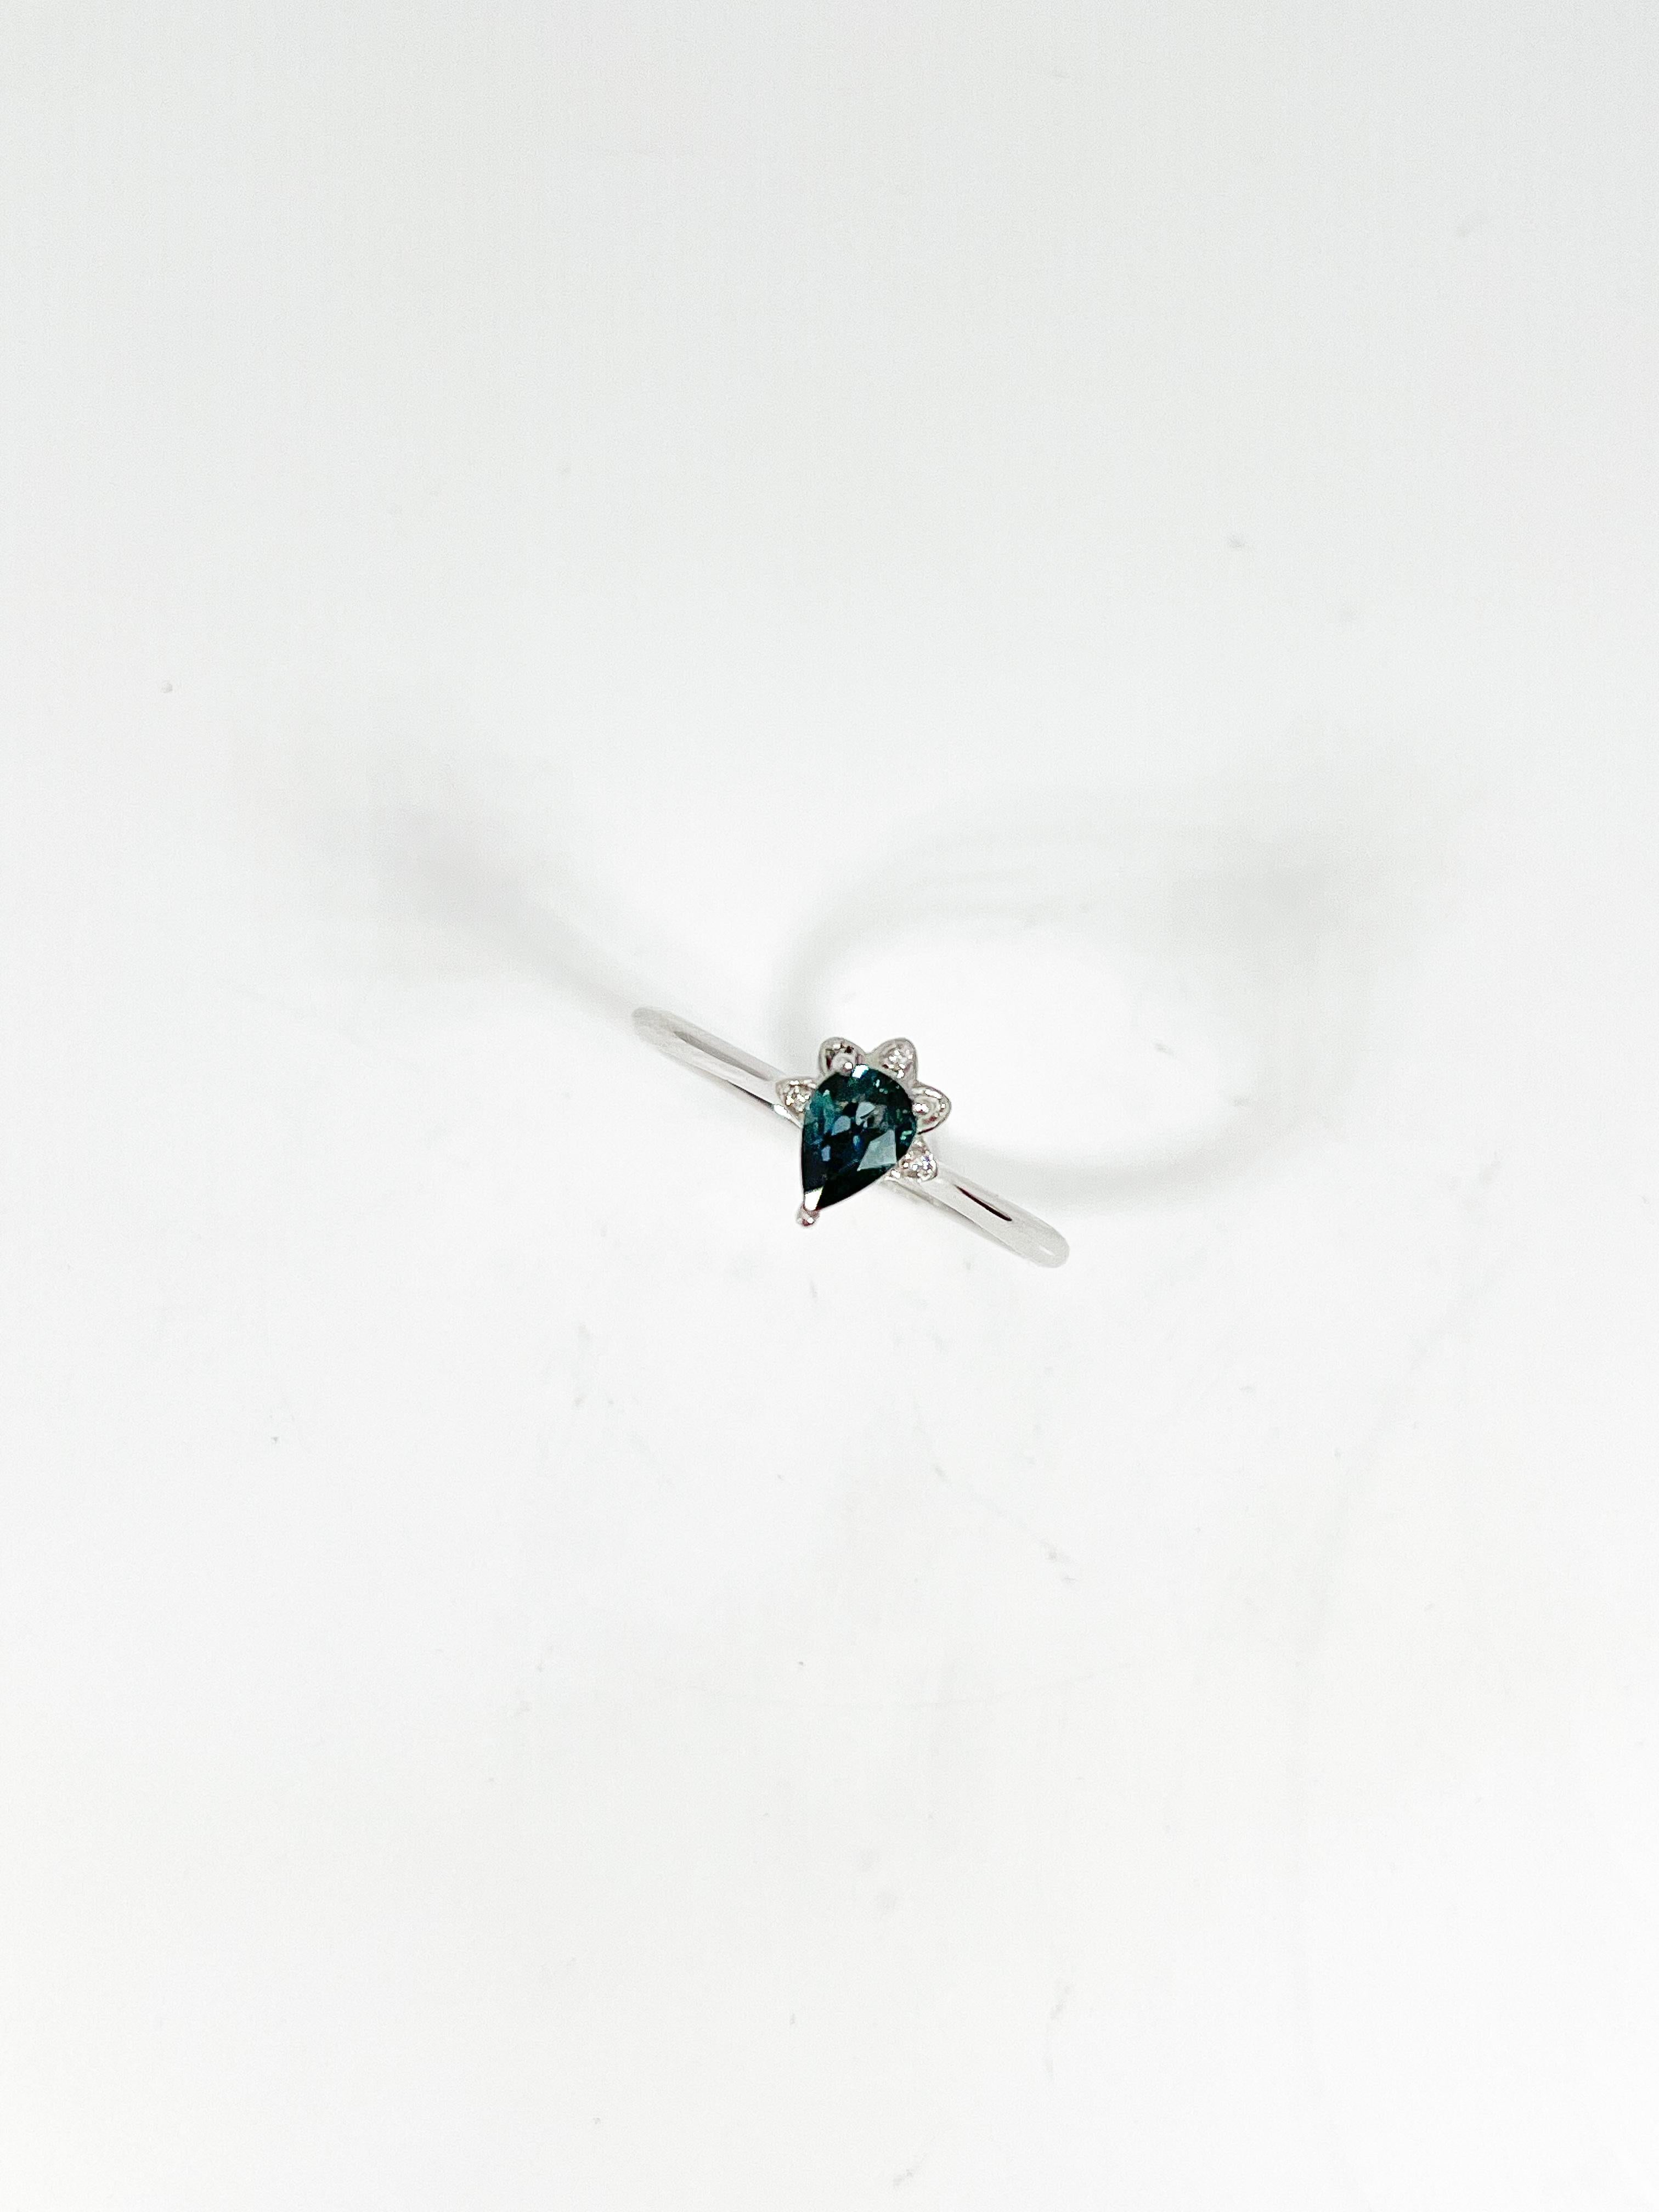 14k white gold ring with a teal pear sapphire center stone with a .50 CTW diamond flower design that goes underneath the sapphire. The center stone has a measurement of 6.5 x 4.2, the ring is a size 7, and has a total weight of 2.15 grams.